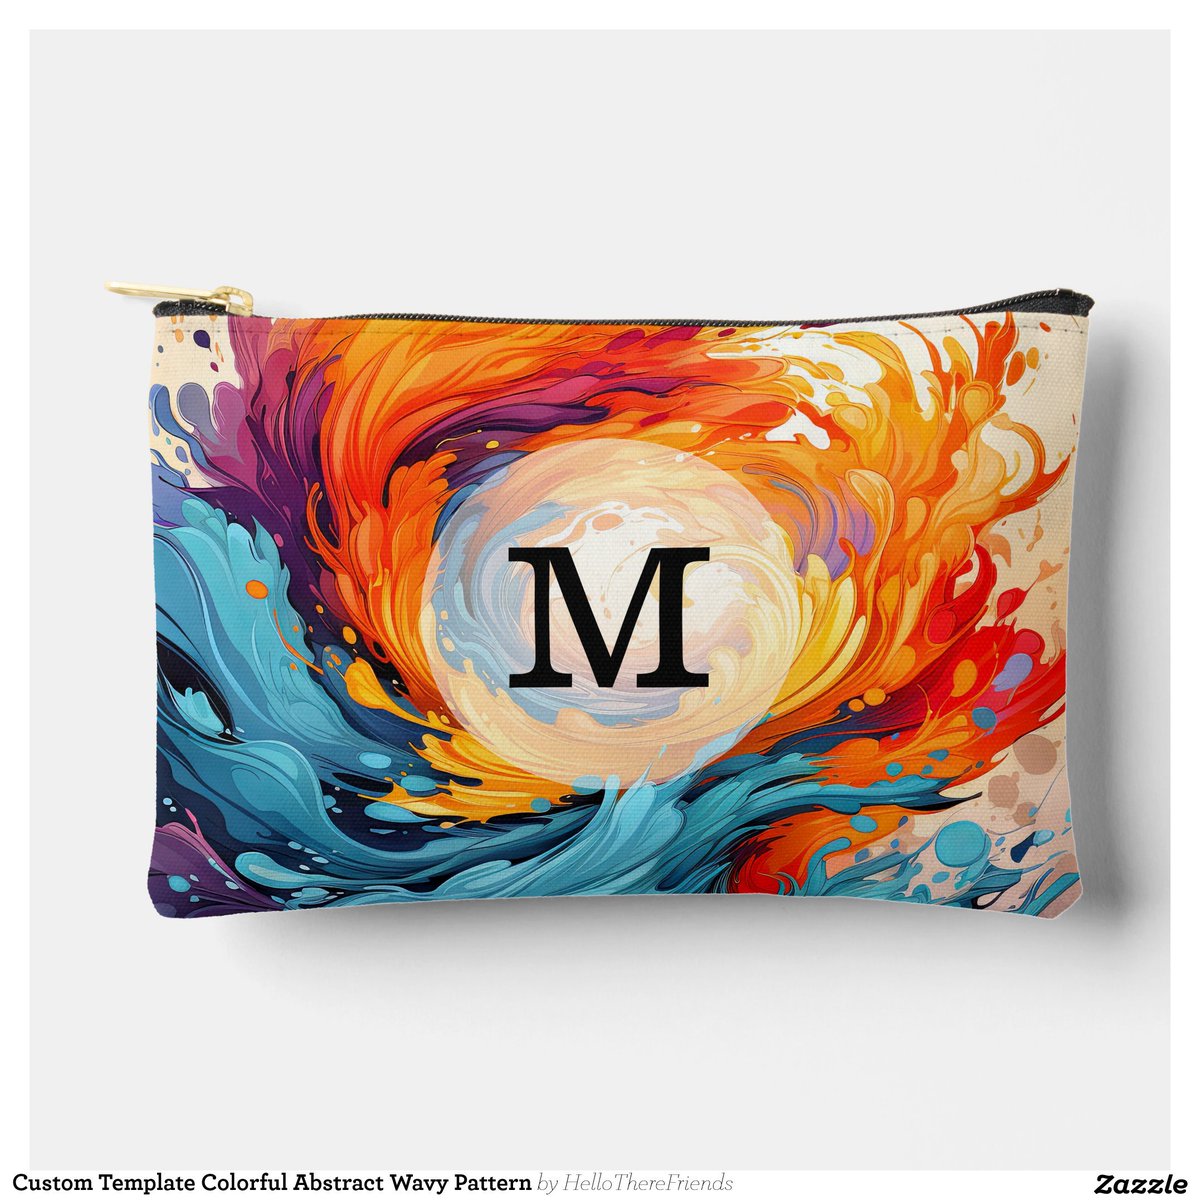 Custom Template Colorful Abstract Wavy Pattern Accessory Pouch→zazzle.com/z/aaqo4932?rf=…

#Makeupbag #Handbag #Accessories #CosmeticBag #Pocketbook #Pulse #MothersDay #GiftIdeas #Daughters #Zazzle